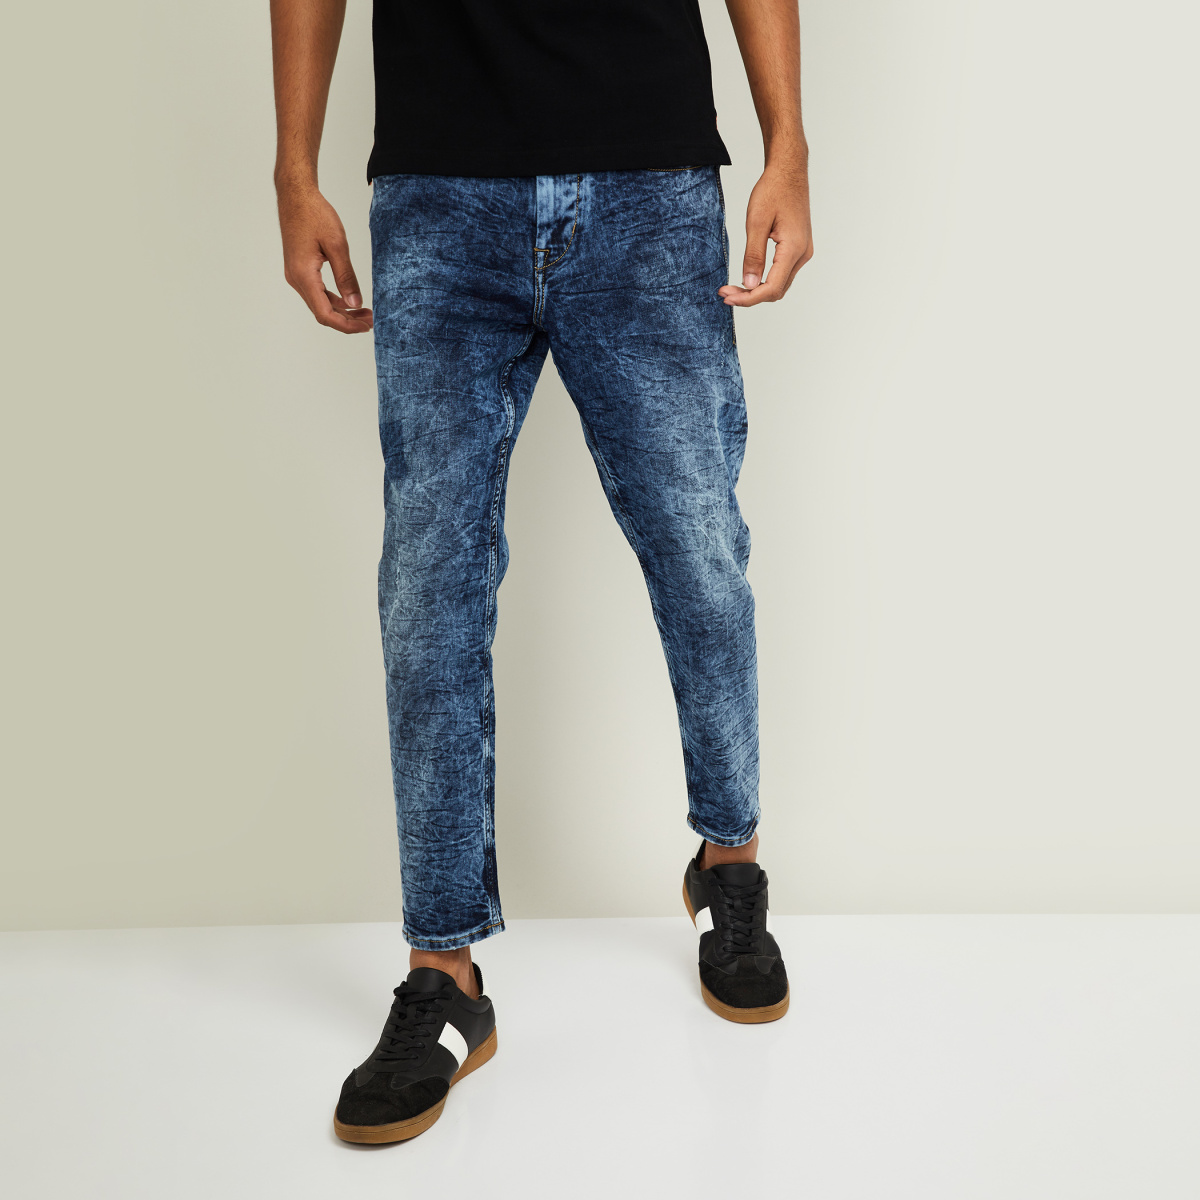 Dodgers Blue Stone Wash Whisker Stretch Jeans : Made To Measure Custom Jeans  For Men & Women, MakeYourOwnJeans®